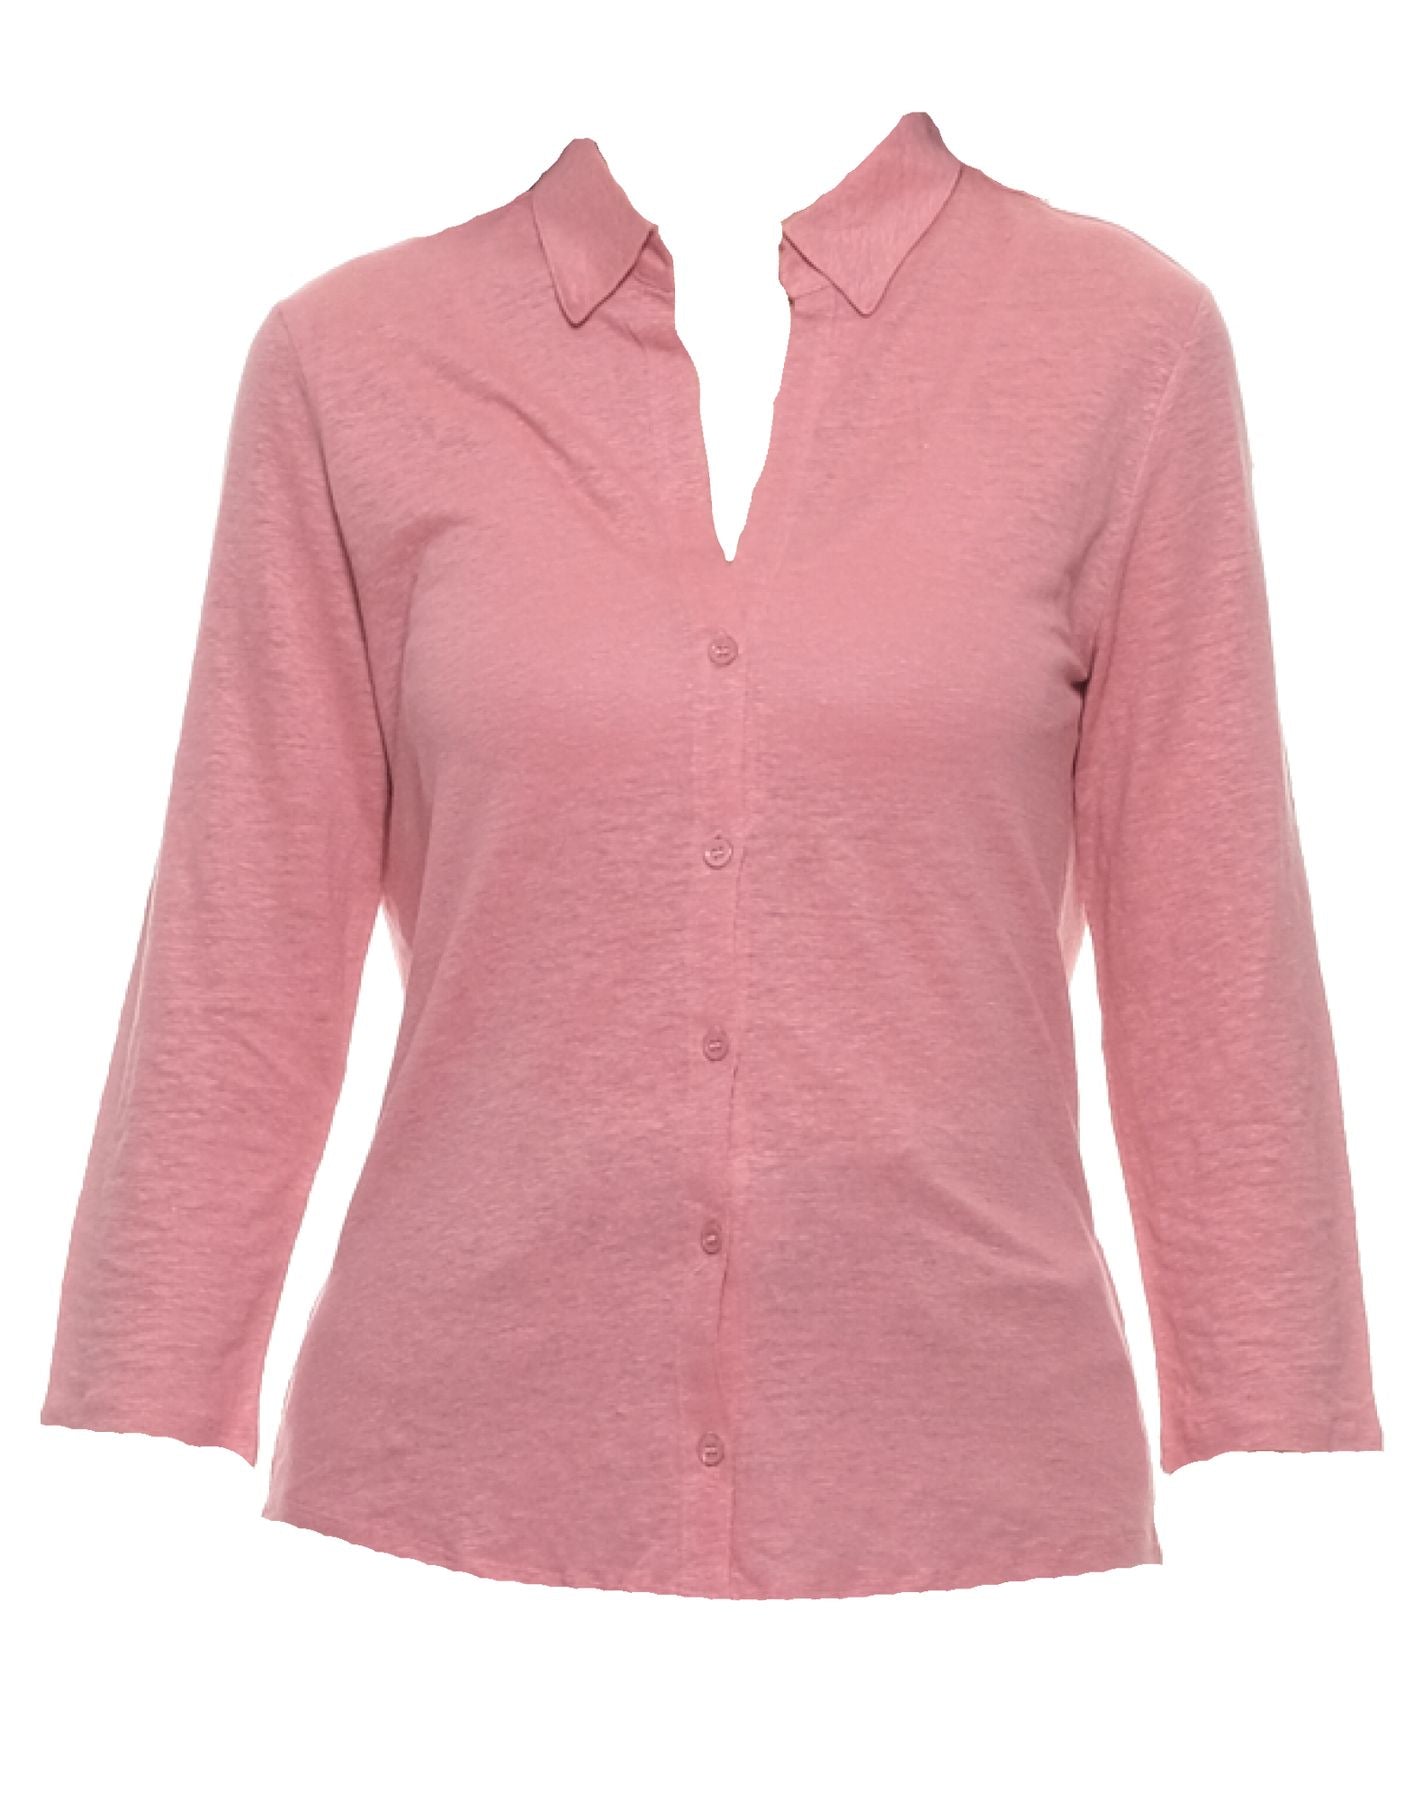 Polo for woman M011-FCH079 594 Majestic Filatures